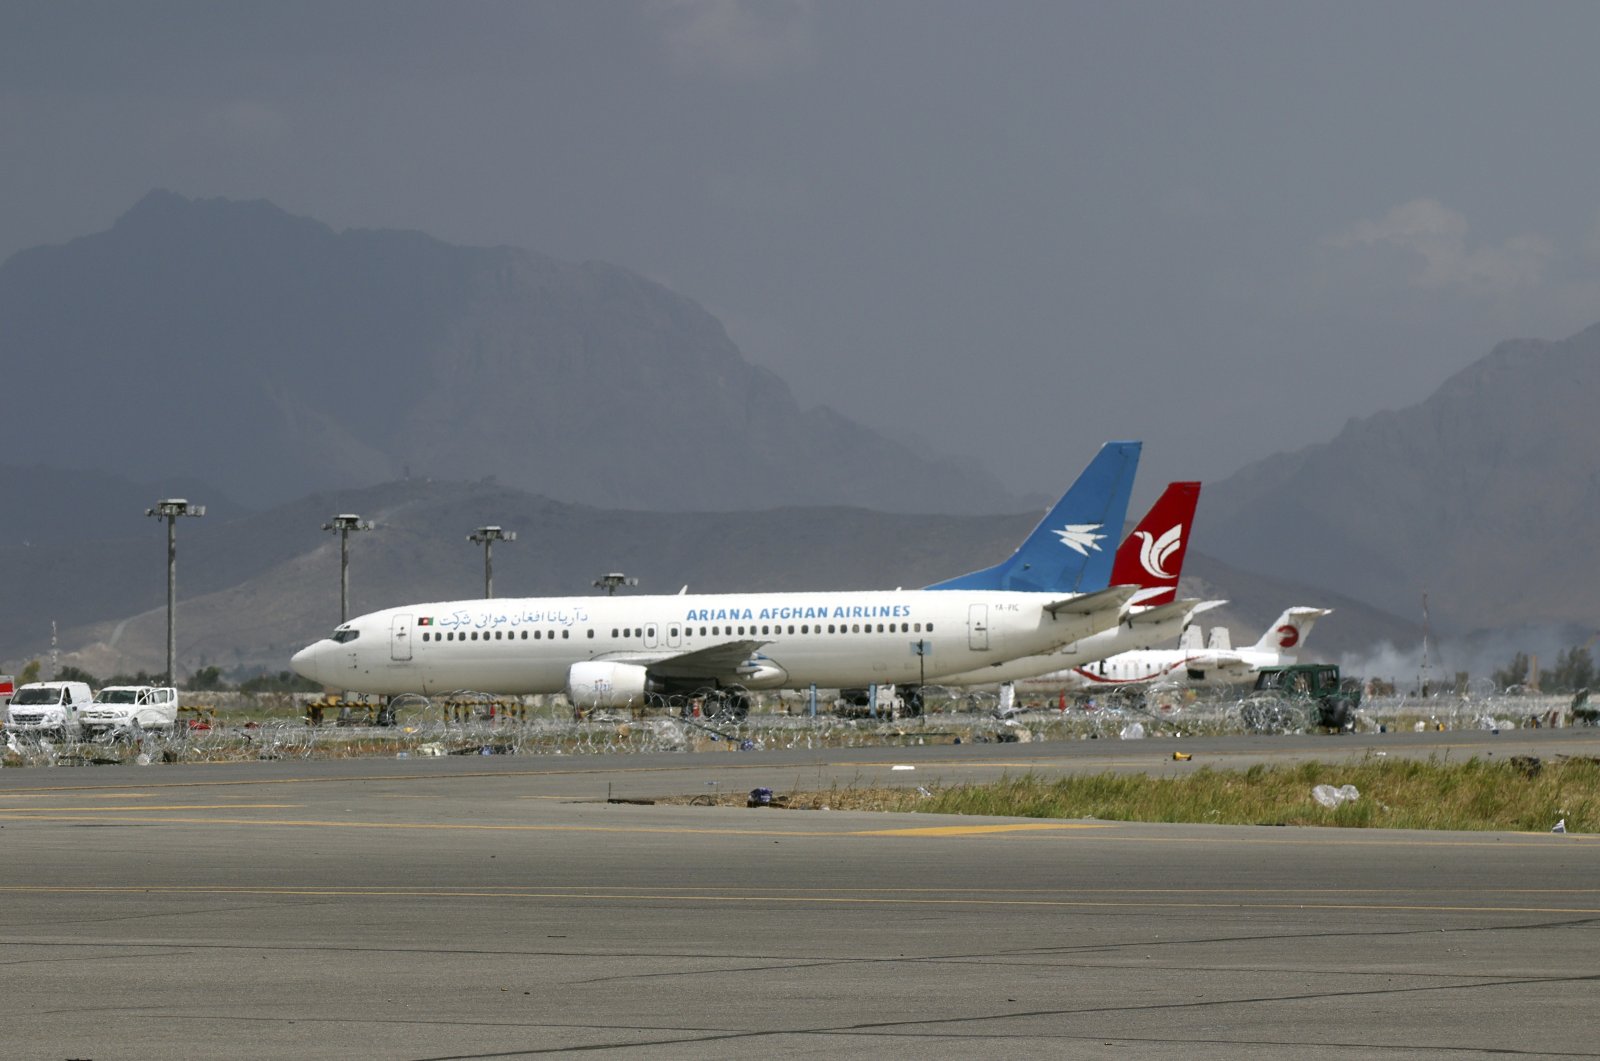 Aircraft are parked on the tarmac of the Hamid Karzai International Airport after the U.S. military's withdrawal, in Kabul, Afghanistan, Aug. 31, 2021. (AP Photo)